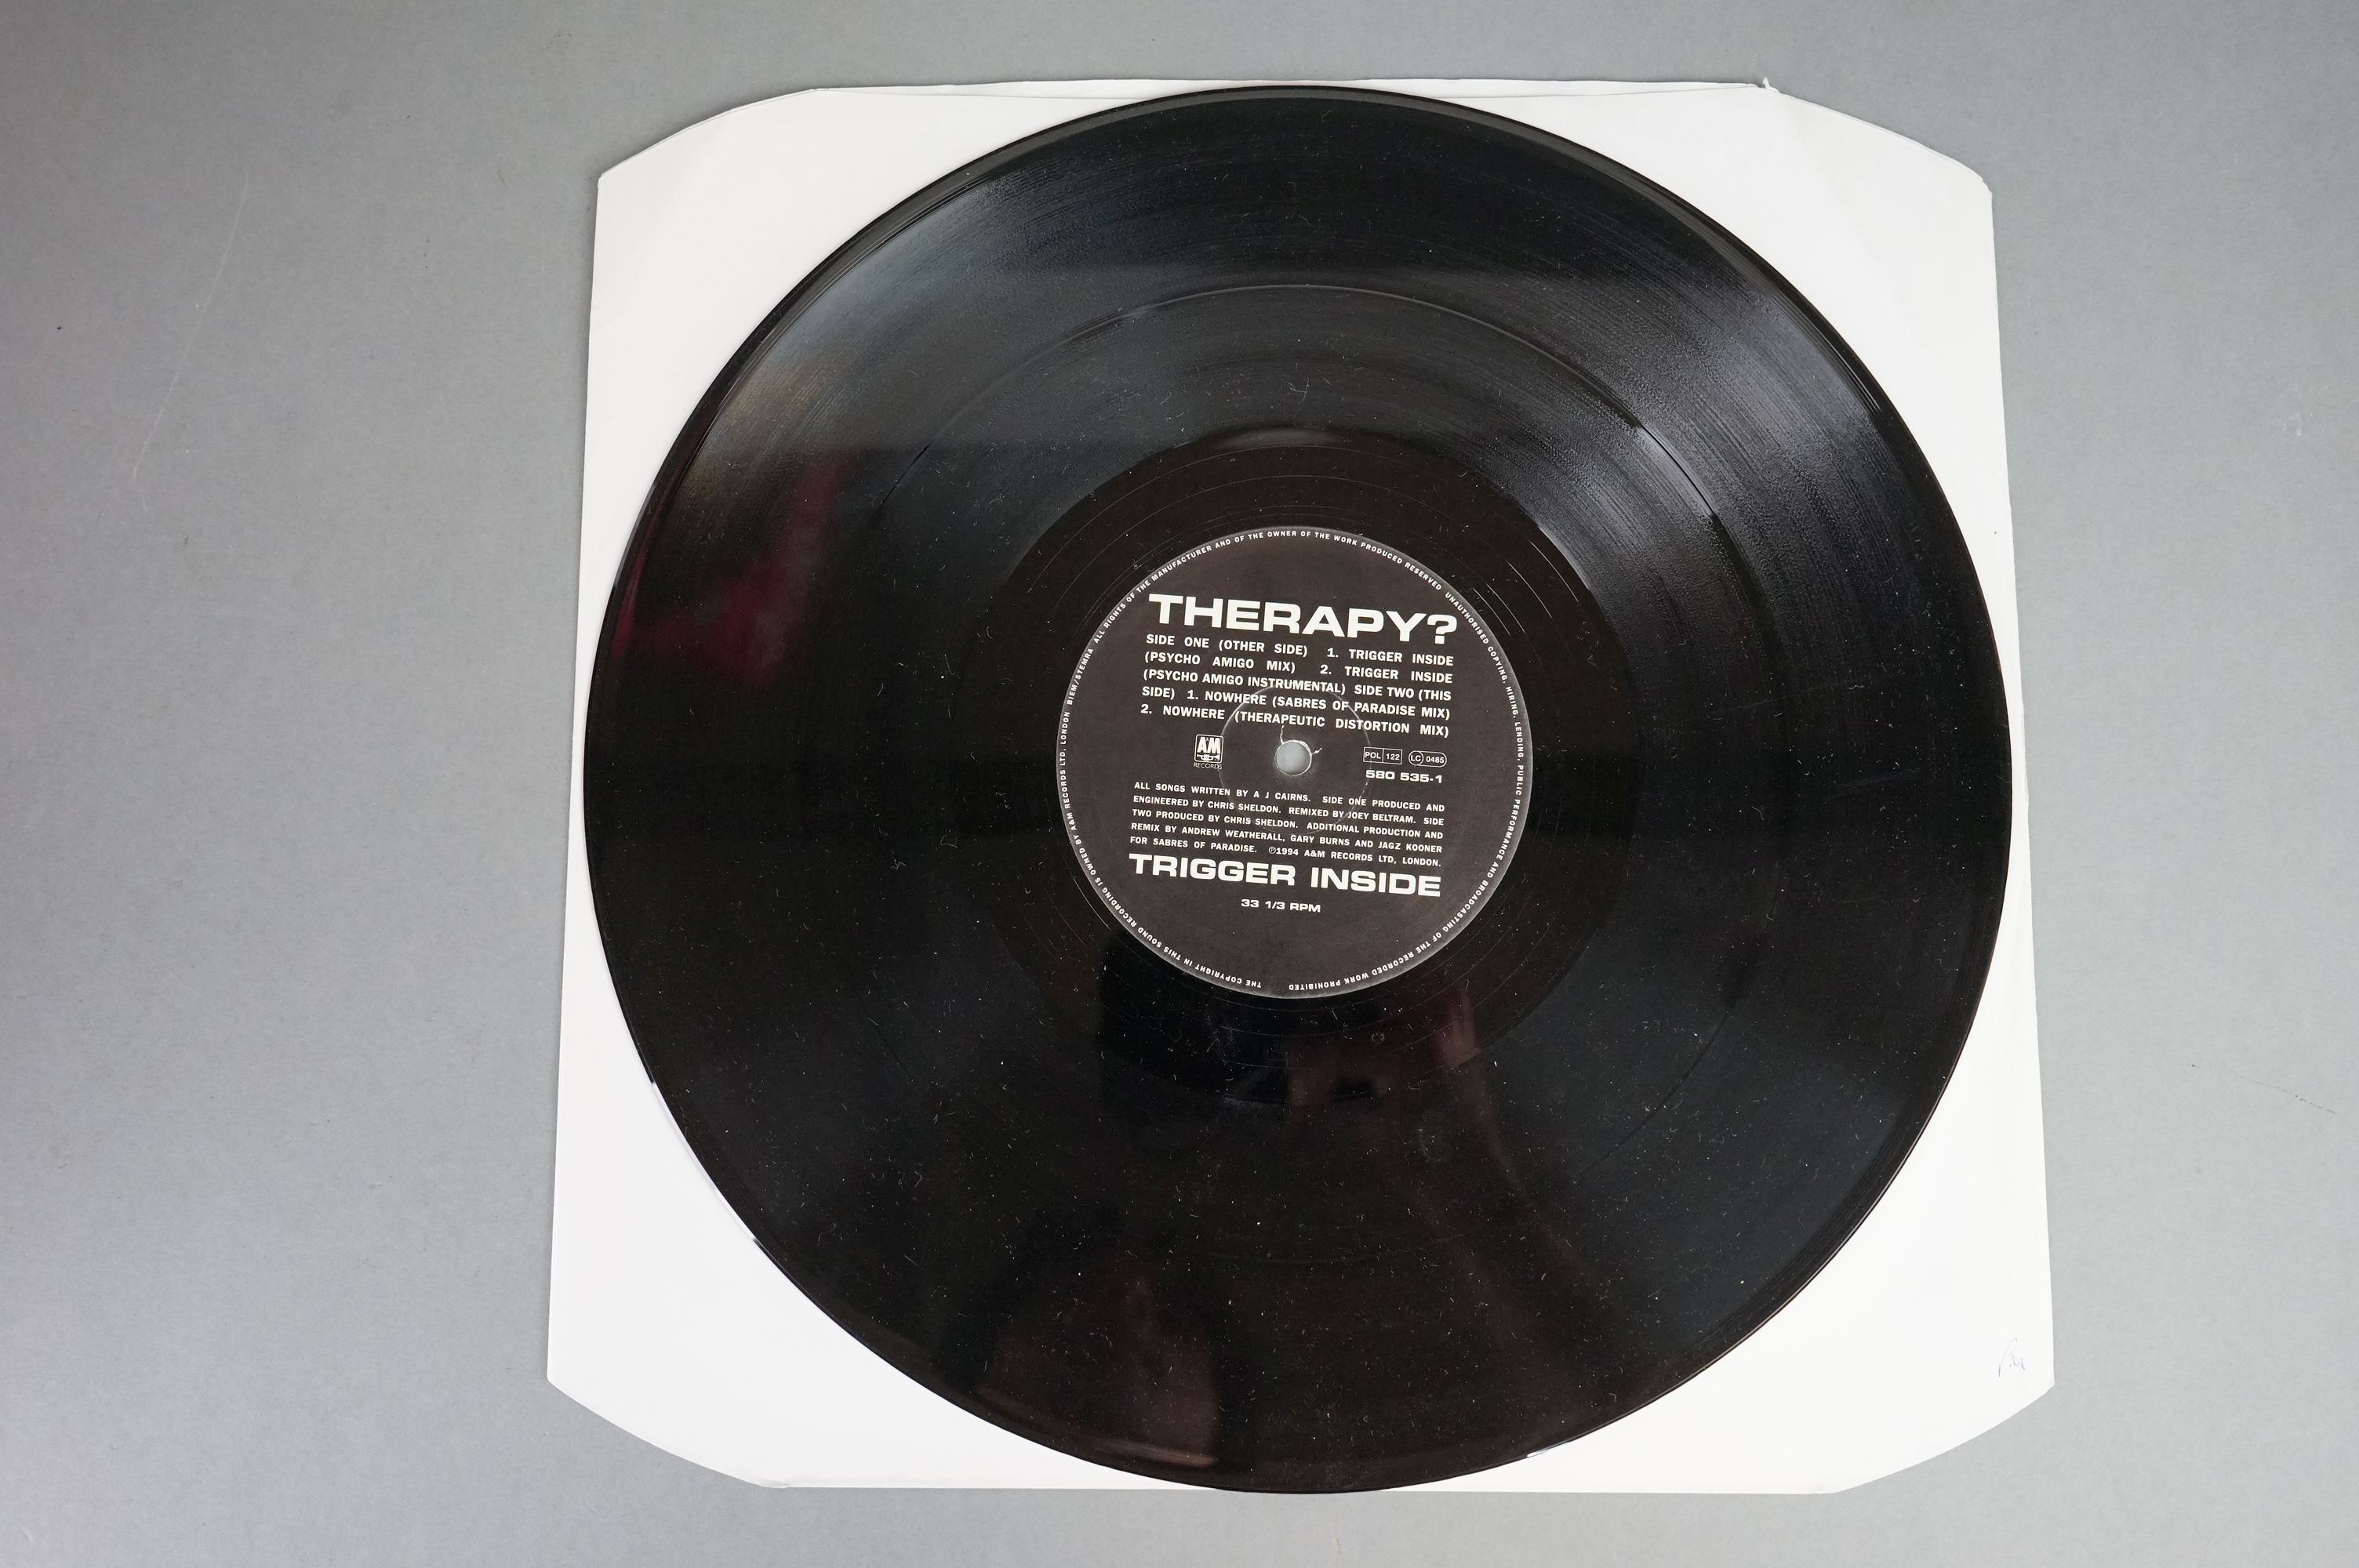 Vinyl - Therapy? - Trigger Inside Remixes 12 2 single plus 5 x 7" singles to include Opal Mantra ( - Image 3 of 9